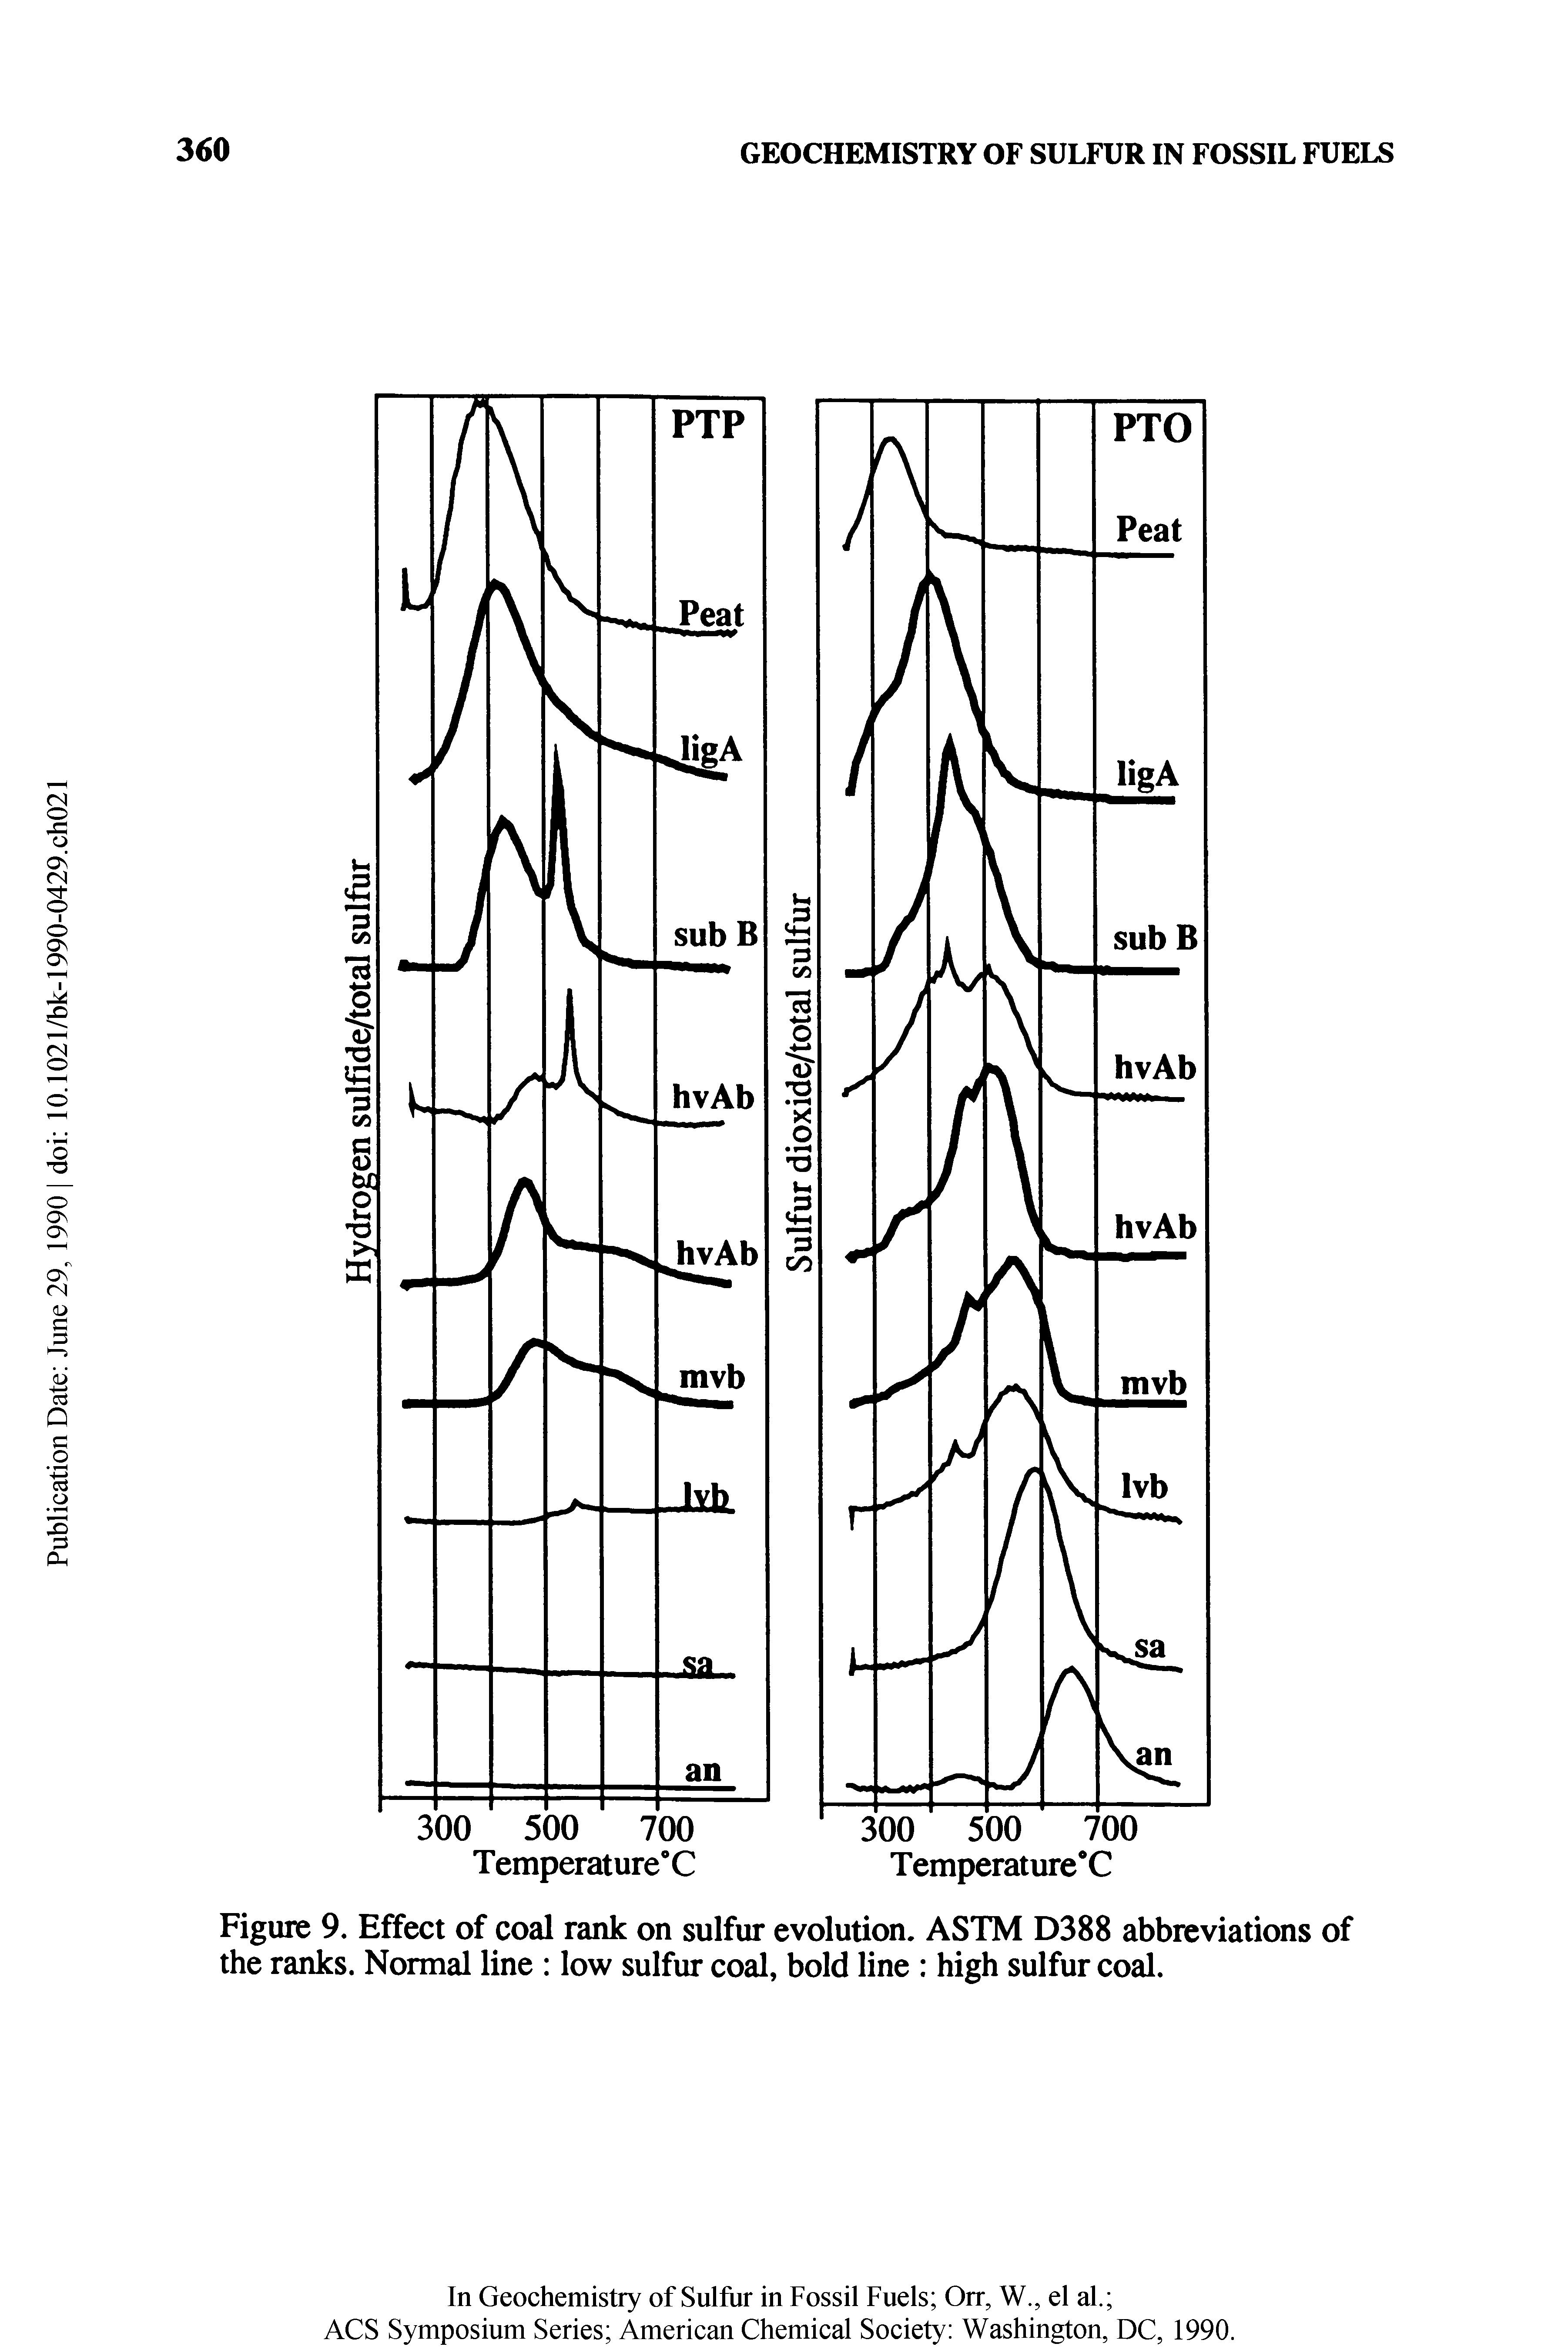 Figure 9. Effect of coal rank on sulfur evolution. ASTM D388 abbreviations of the ranks. Normal line low sulfur coal, bold line high sulfur coal.